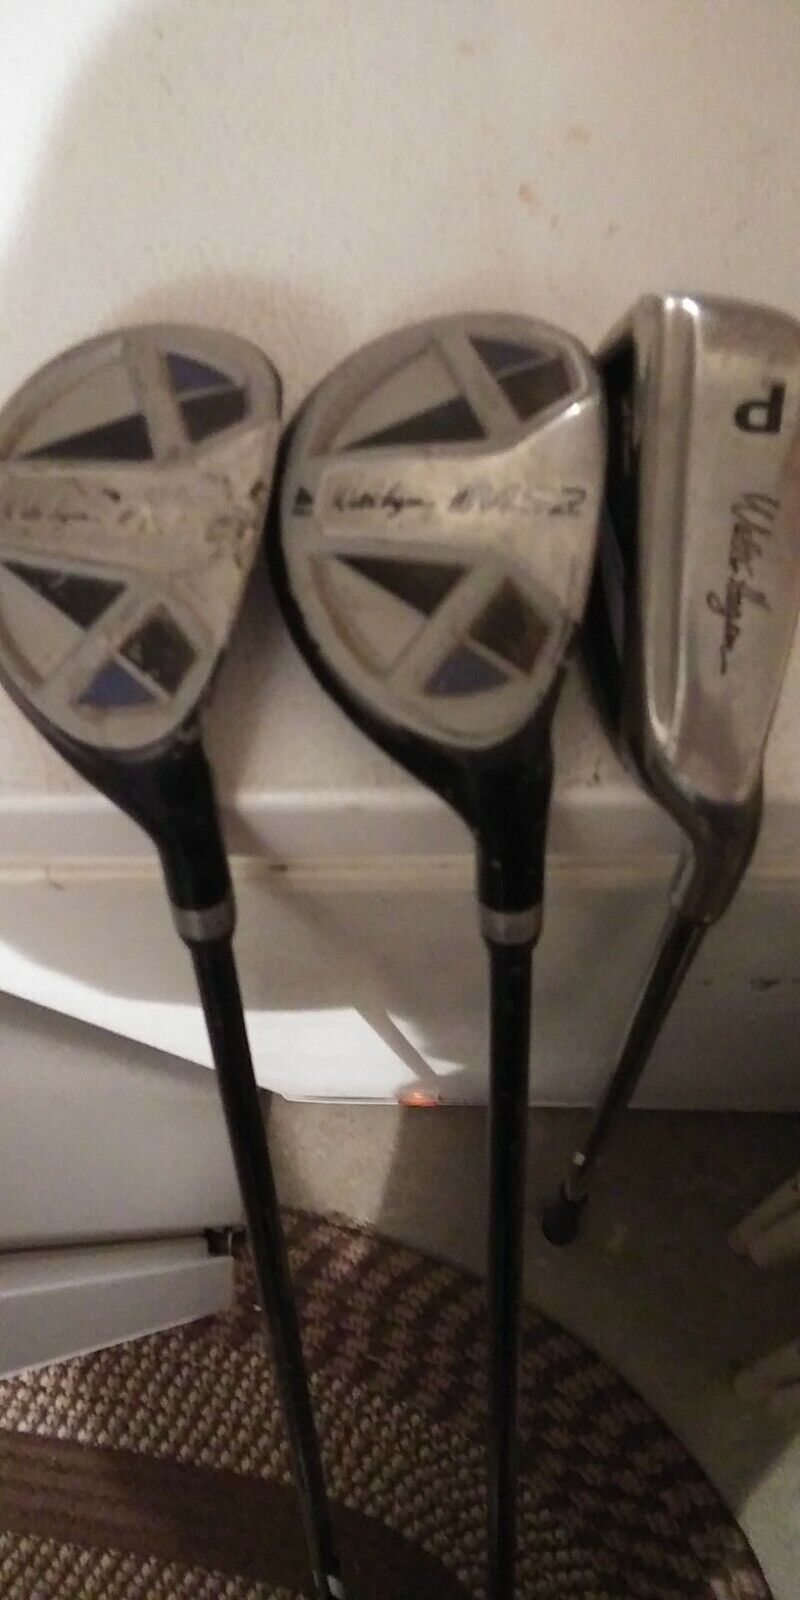 Walter Hagen MS2 pitching wedge an #4an5 right handed fairway woods